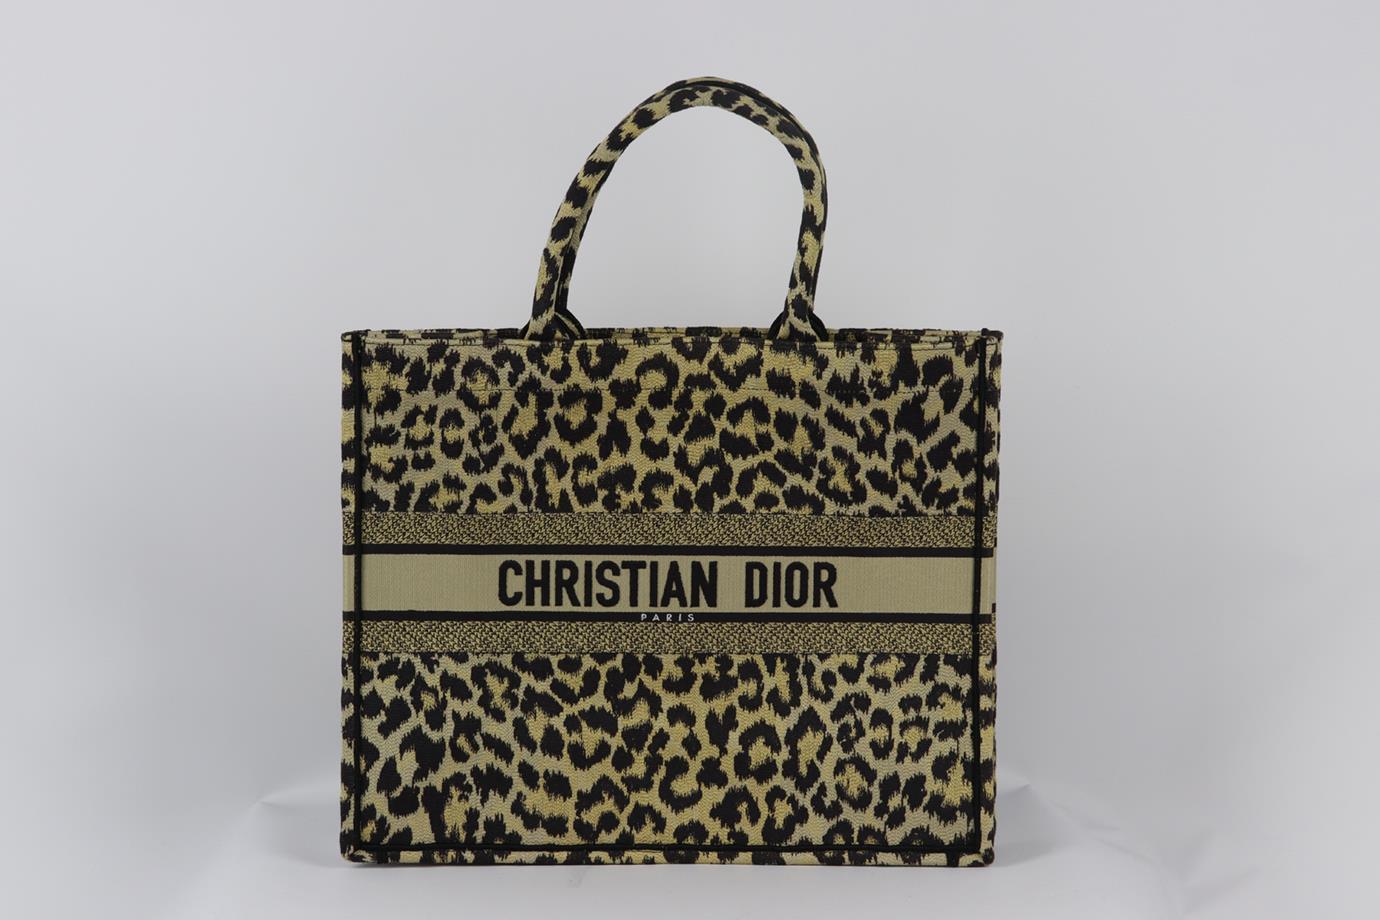 Christian Dior 2021 Book large leopard jacquard canvas tote bag. Made from black, gold and brown leopard design with the brand's iconic logo on the front, it opens to a large internal compartment. Black, gold and brown. Open top. Does not come with